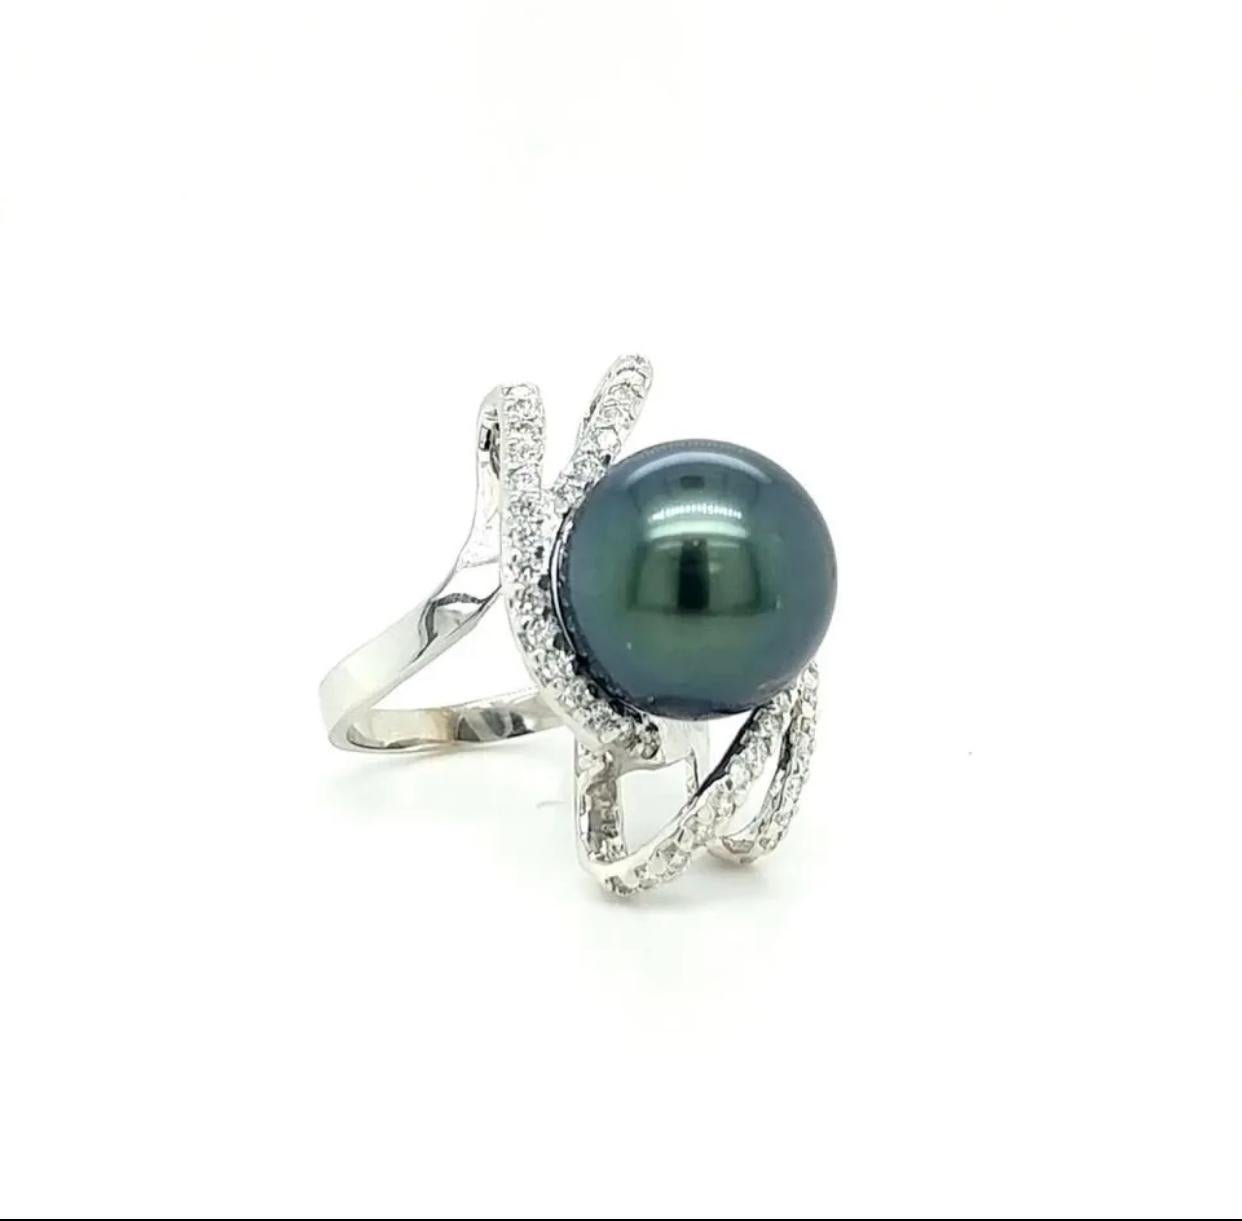 Certified and appraised 14 karat white gold Tahitian pearl and diamond cocktail ring.

The 13 mm dark gray Tahitian pearl is nestled in .63 carats of round, brilliant-cut F-G, VS2-SI1 diamonds. The ring is US size 6.5 and weighs 8.6 grams